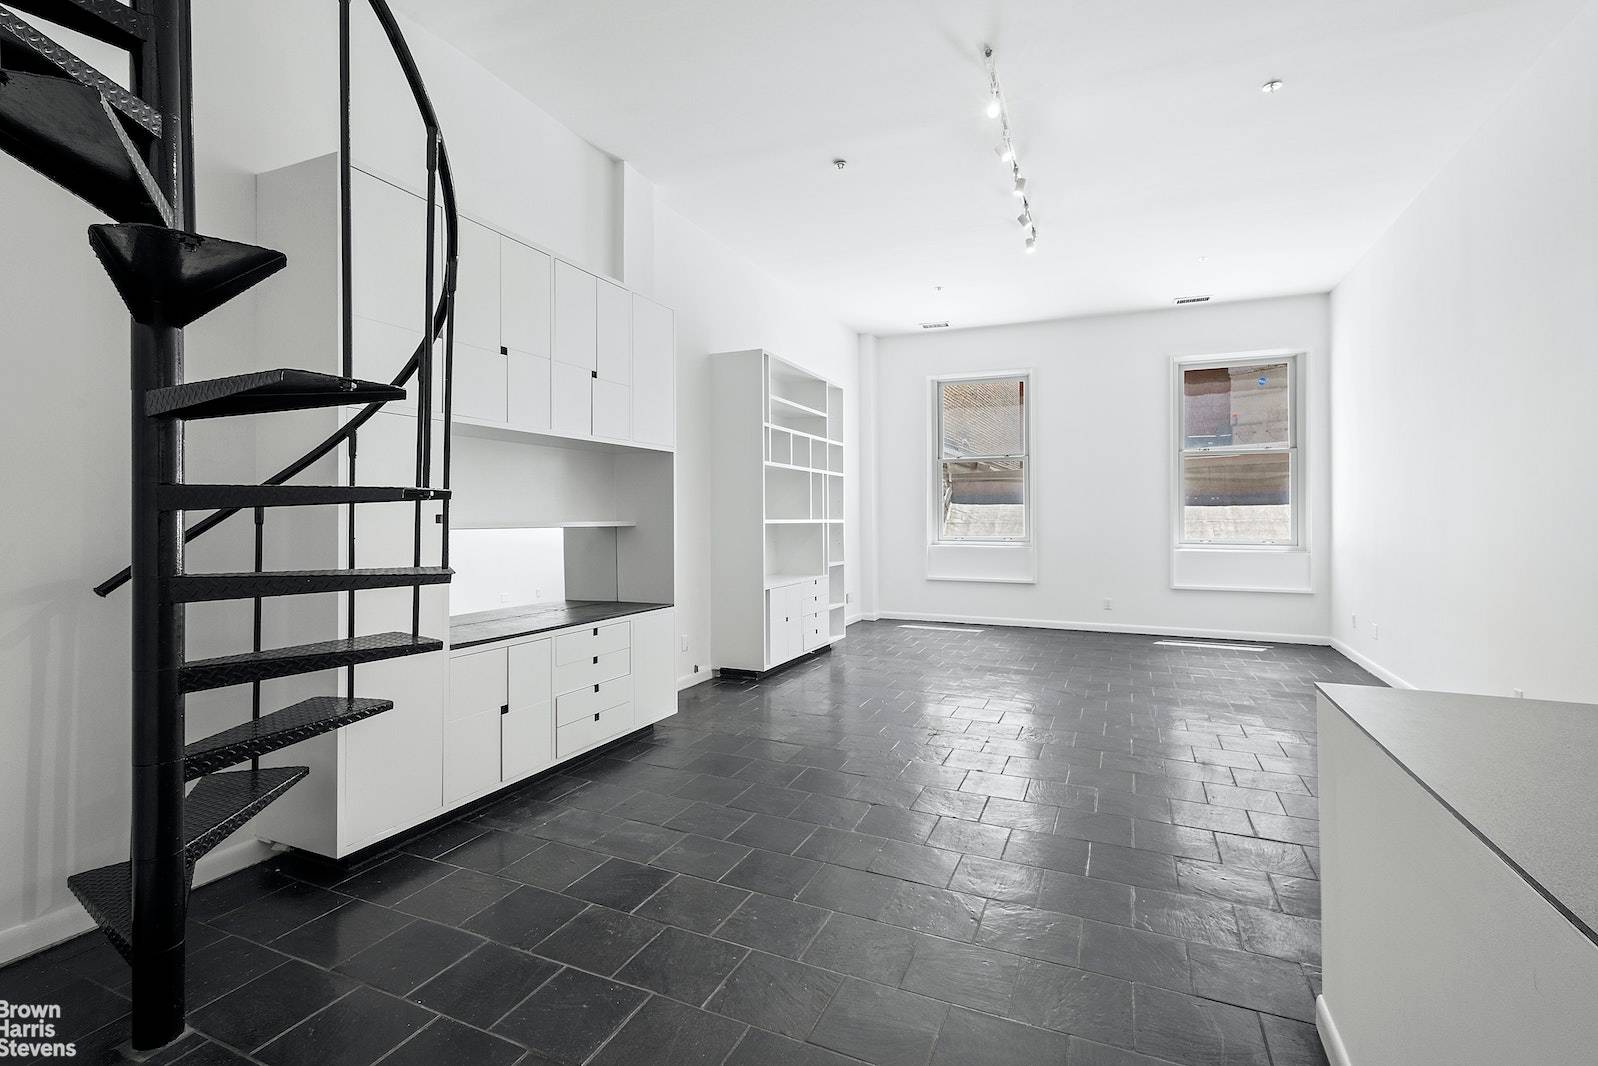 Built in 1920 and betwixt NoHo and Greenwich Village exists a Historic loft building, 680 Broadway is offering a gallery like 1200 SF 2 bedroom, 1 baths and a Den.